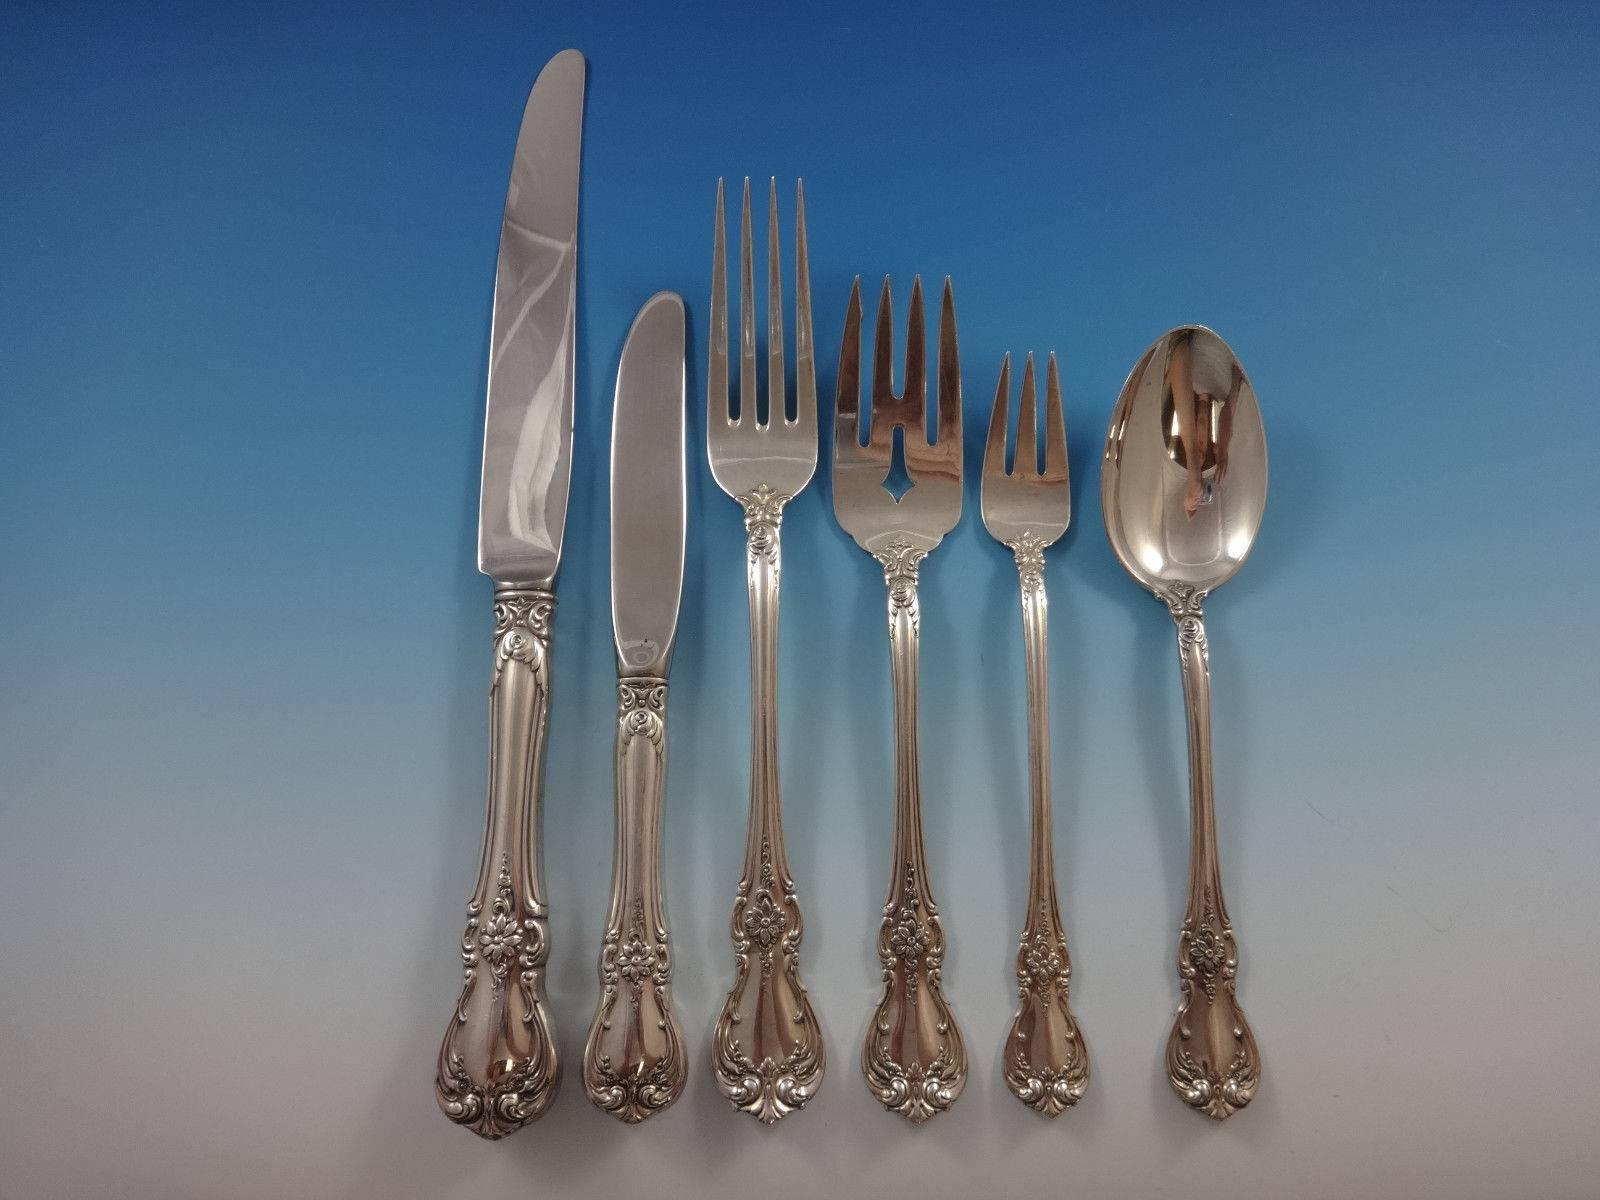 Old Master brings together the finest in traditional Early Victorian design motifs with skillful artistry. The crown of leaves, the center rosette, scrollwork, flutes and the violin-shaped handle are all traditionally famous motifs of sterling